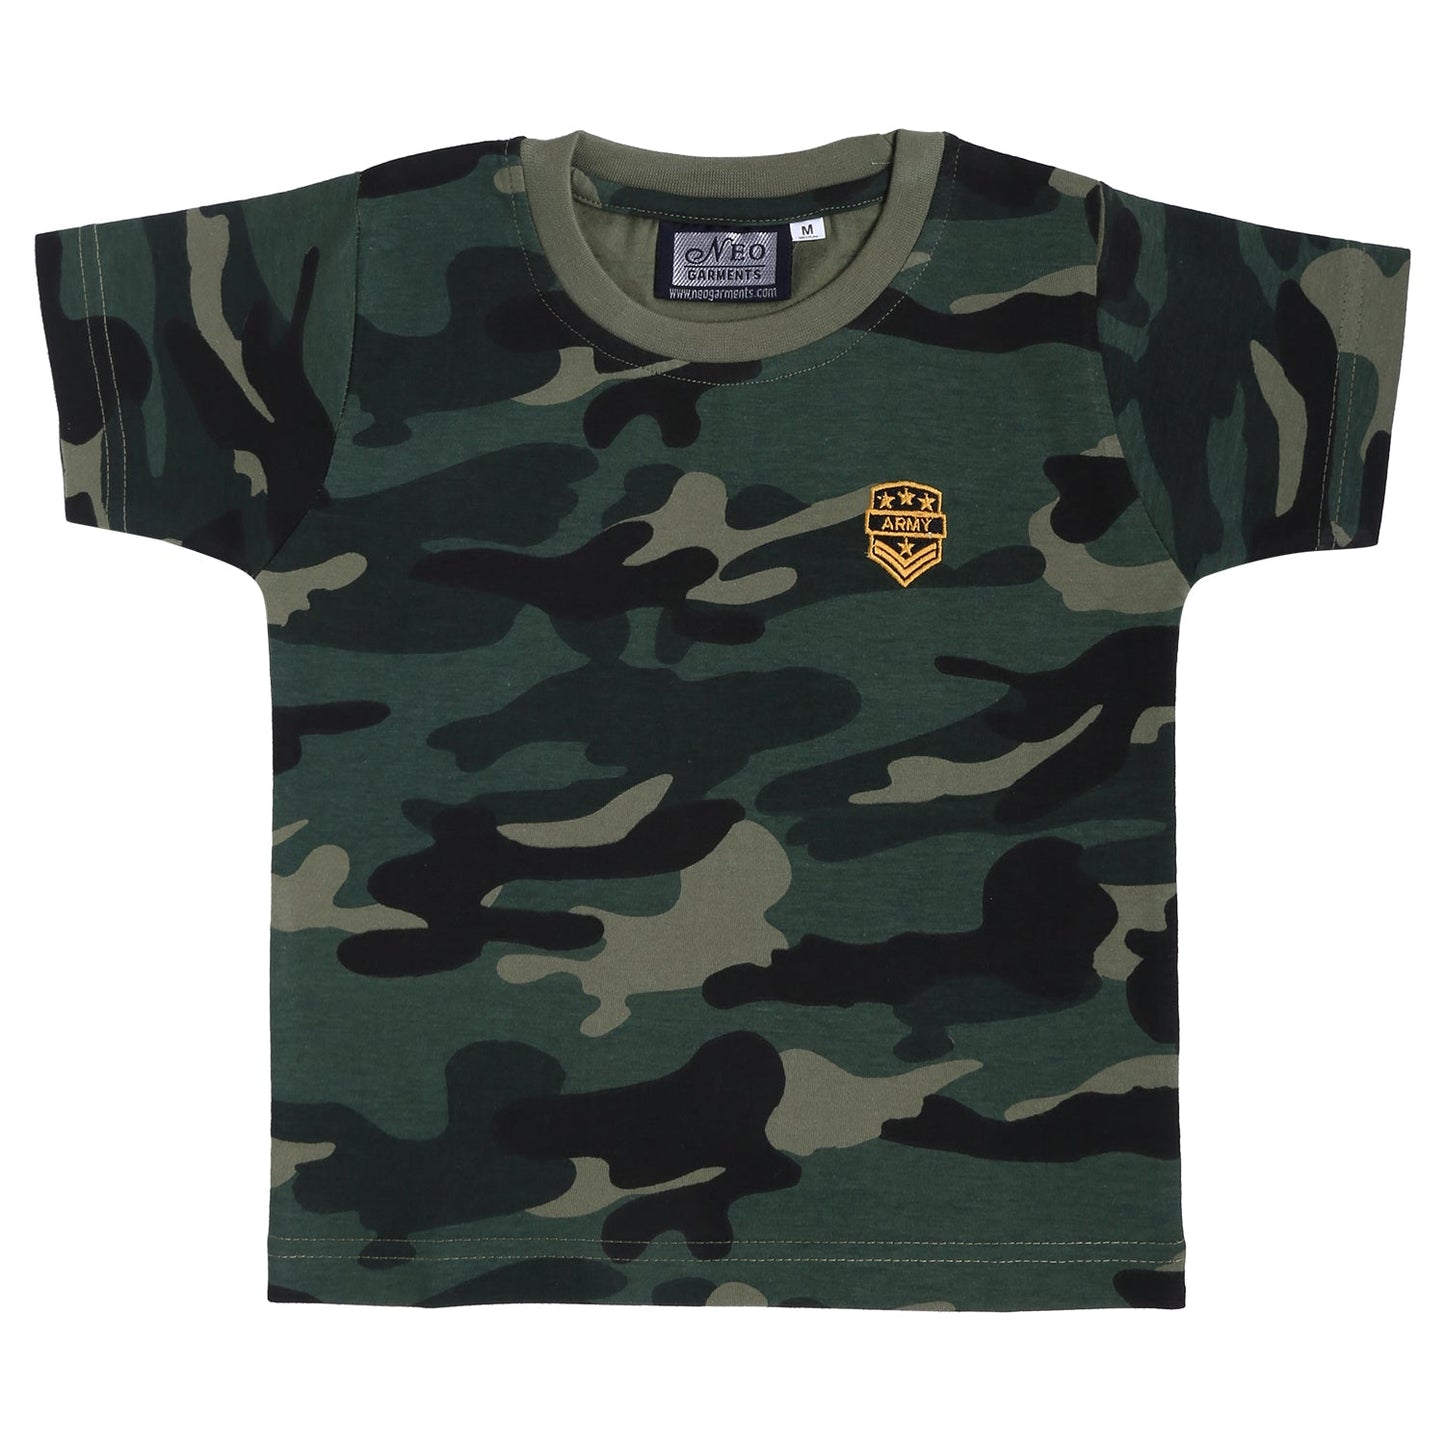 NEO GARMENTS Kids Unisex Round Neck Printed Cotton T-shirt - CAMOUFLAGE. | SIZE FROM 1 YRS TO 7 YRS.